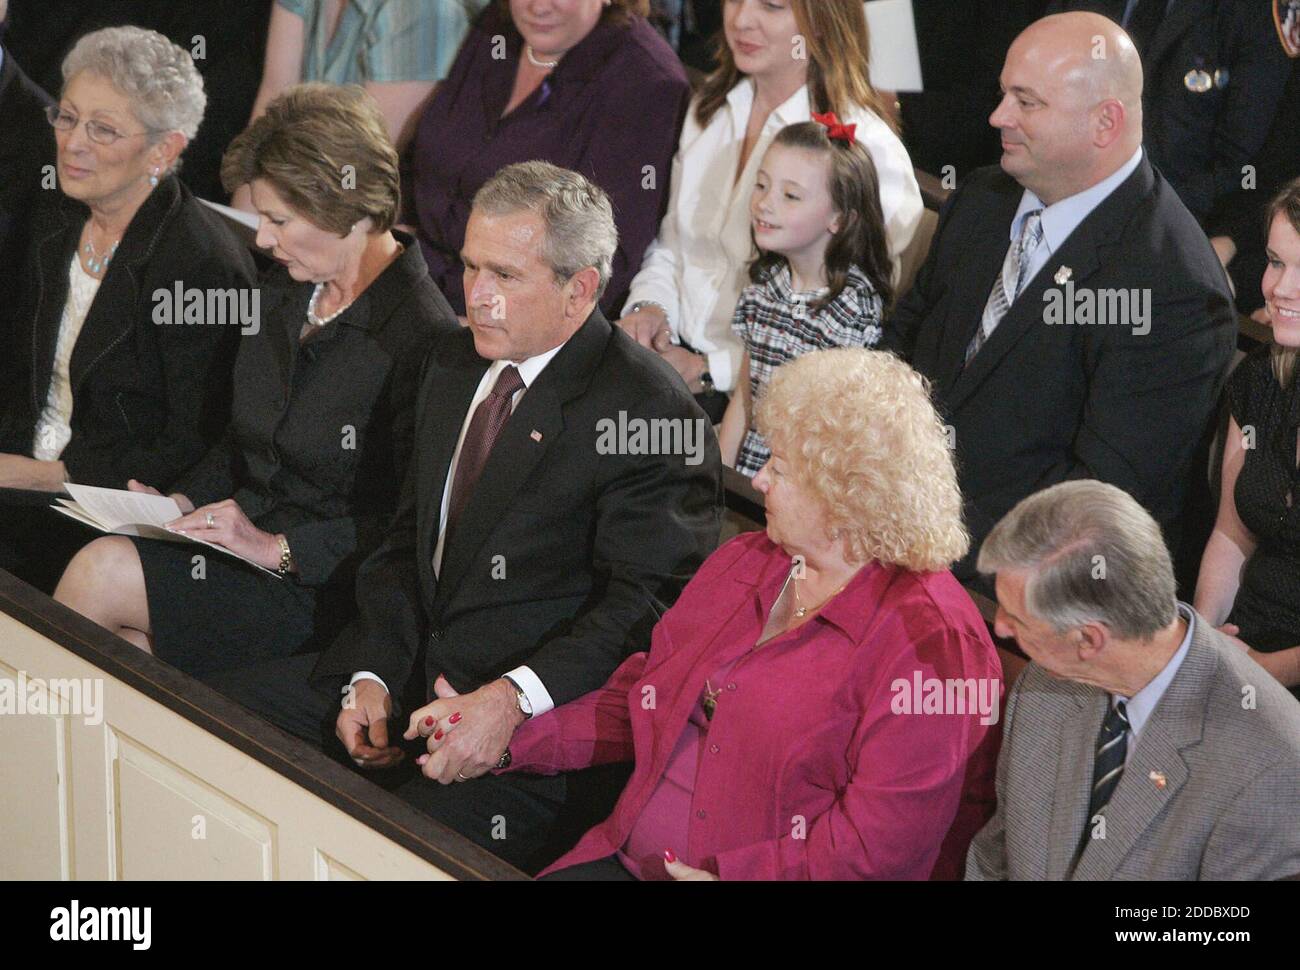 NO FILM, NO VIDEO, NO TV, NO DOCUMENTARY - President George W. Bush and first lady Laura Bush, second from left, join family members who lost loved ones in the terrorist attacks of September 11, for a service of prayer and remembrance at St. Paul's Chapel in Manhattan, Sunday, September 10, 2006. Photo by Charles Eckert/Newsday/MCT/ABACAPRESS.COM Stock Photo